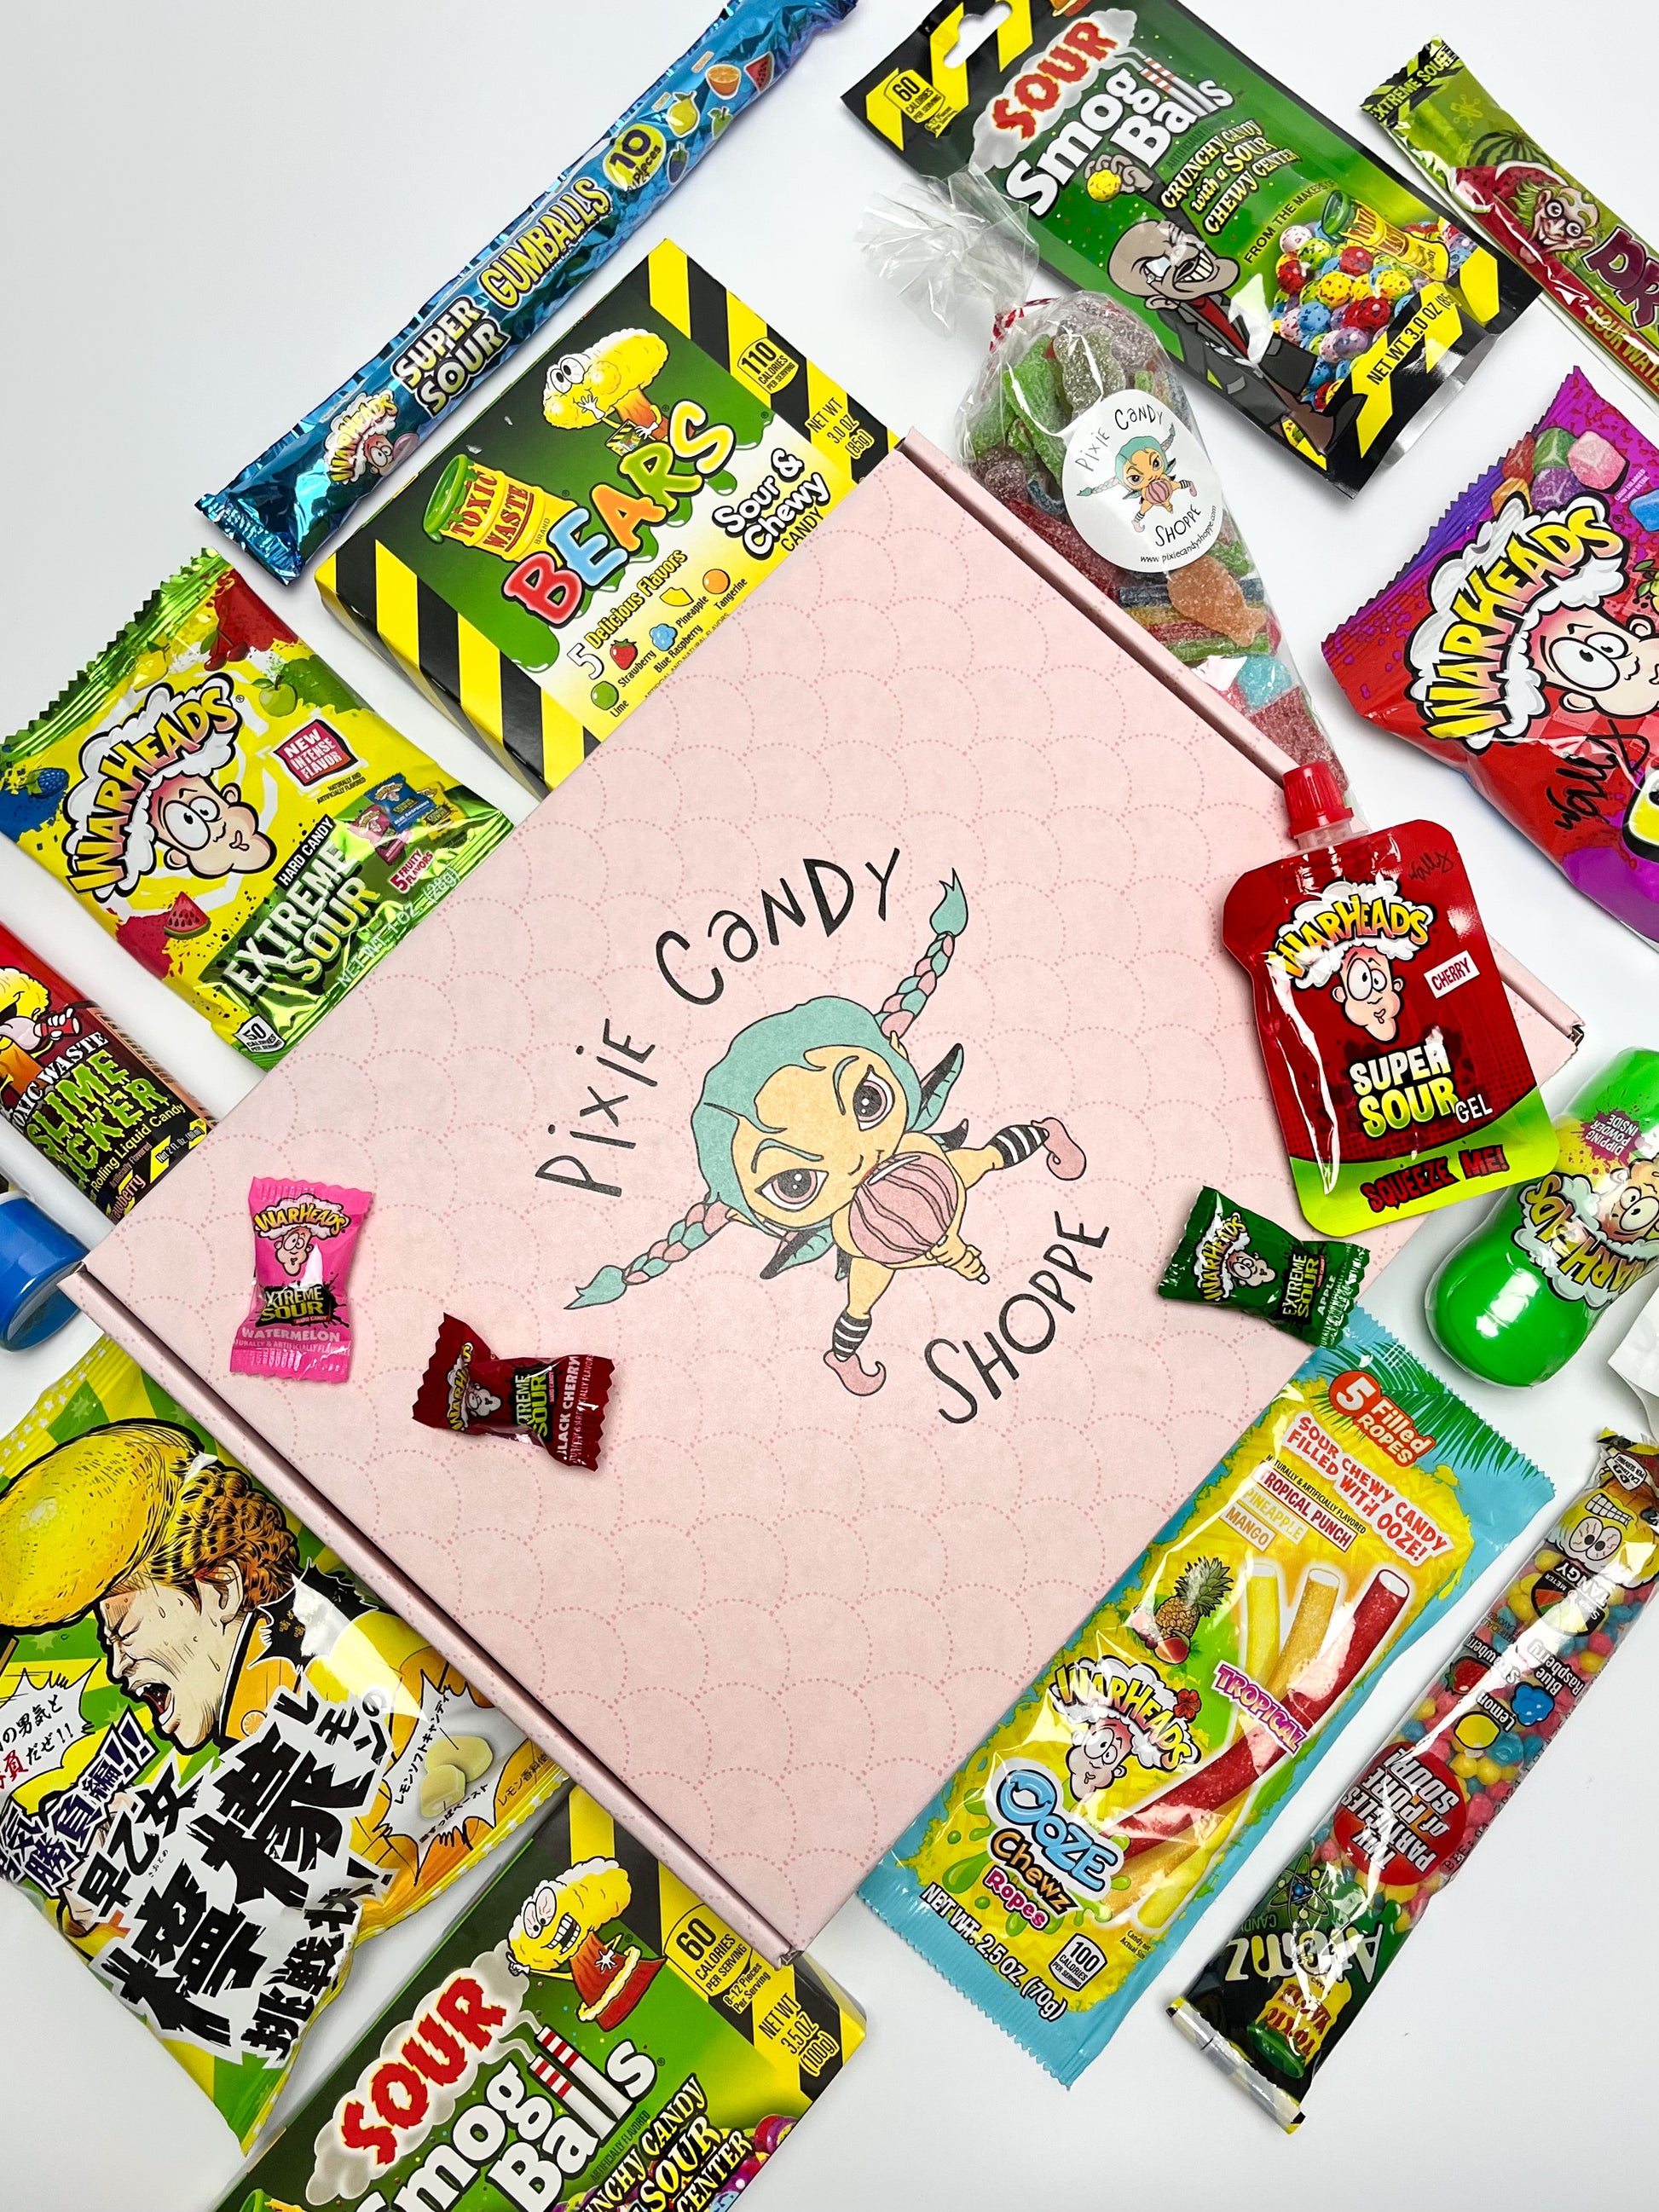 Super Sour Candy Mystery Box Magical Mystery Box Pixie Candy Shoppe   